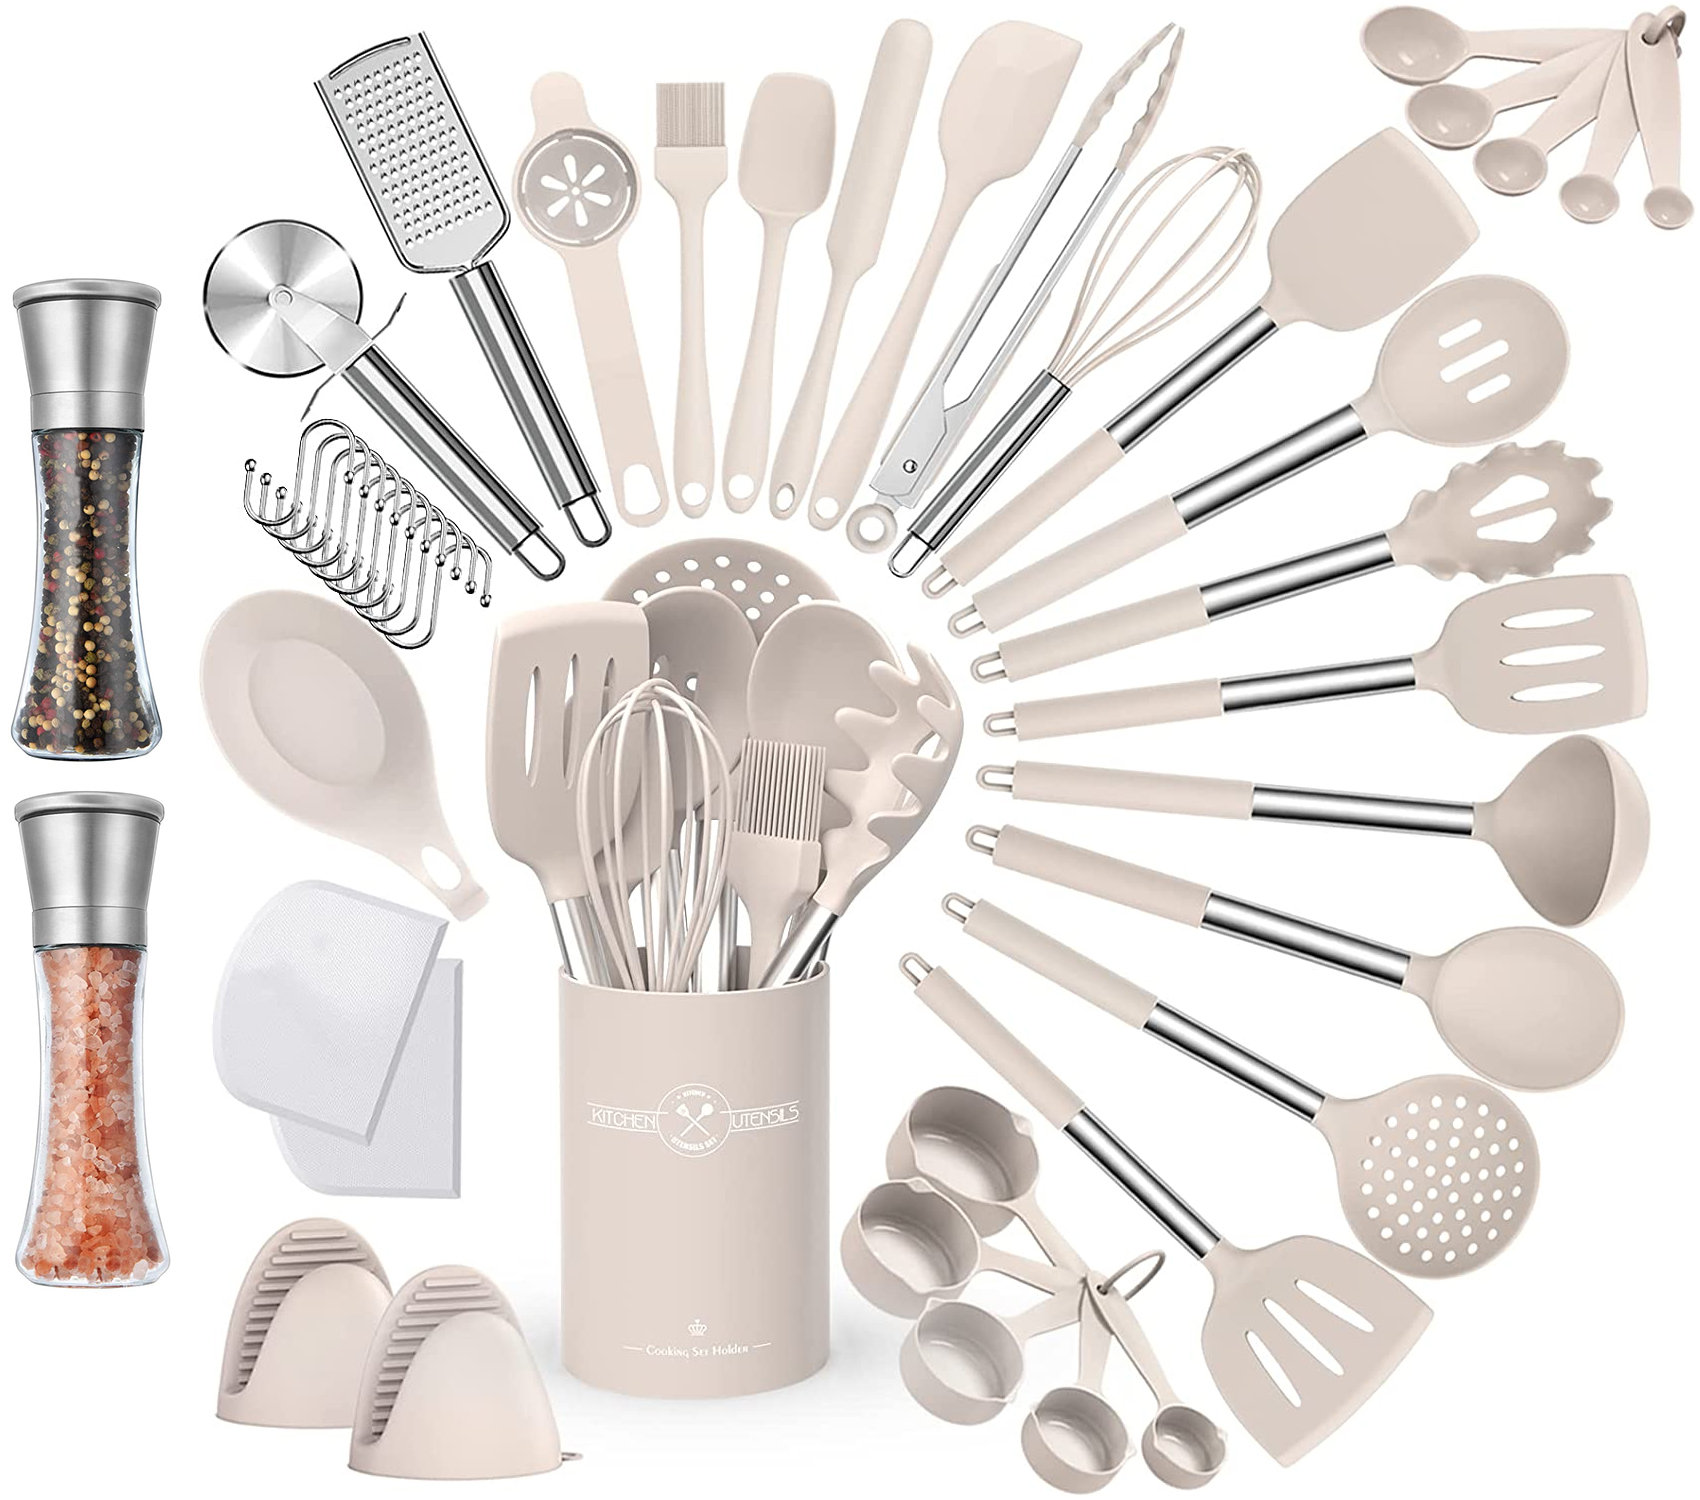 White and Copper Kitchen Utensils - 18 PC Copper Cooking Utensils Set  Includes Copper Utensil Holder, White & Copper Measuring Cups and Spoons,  Rose